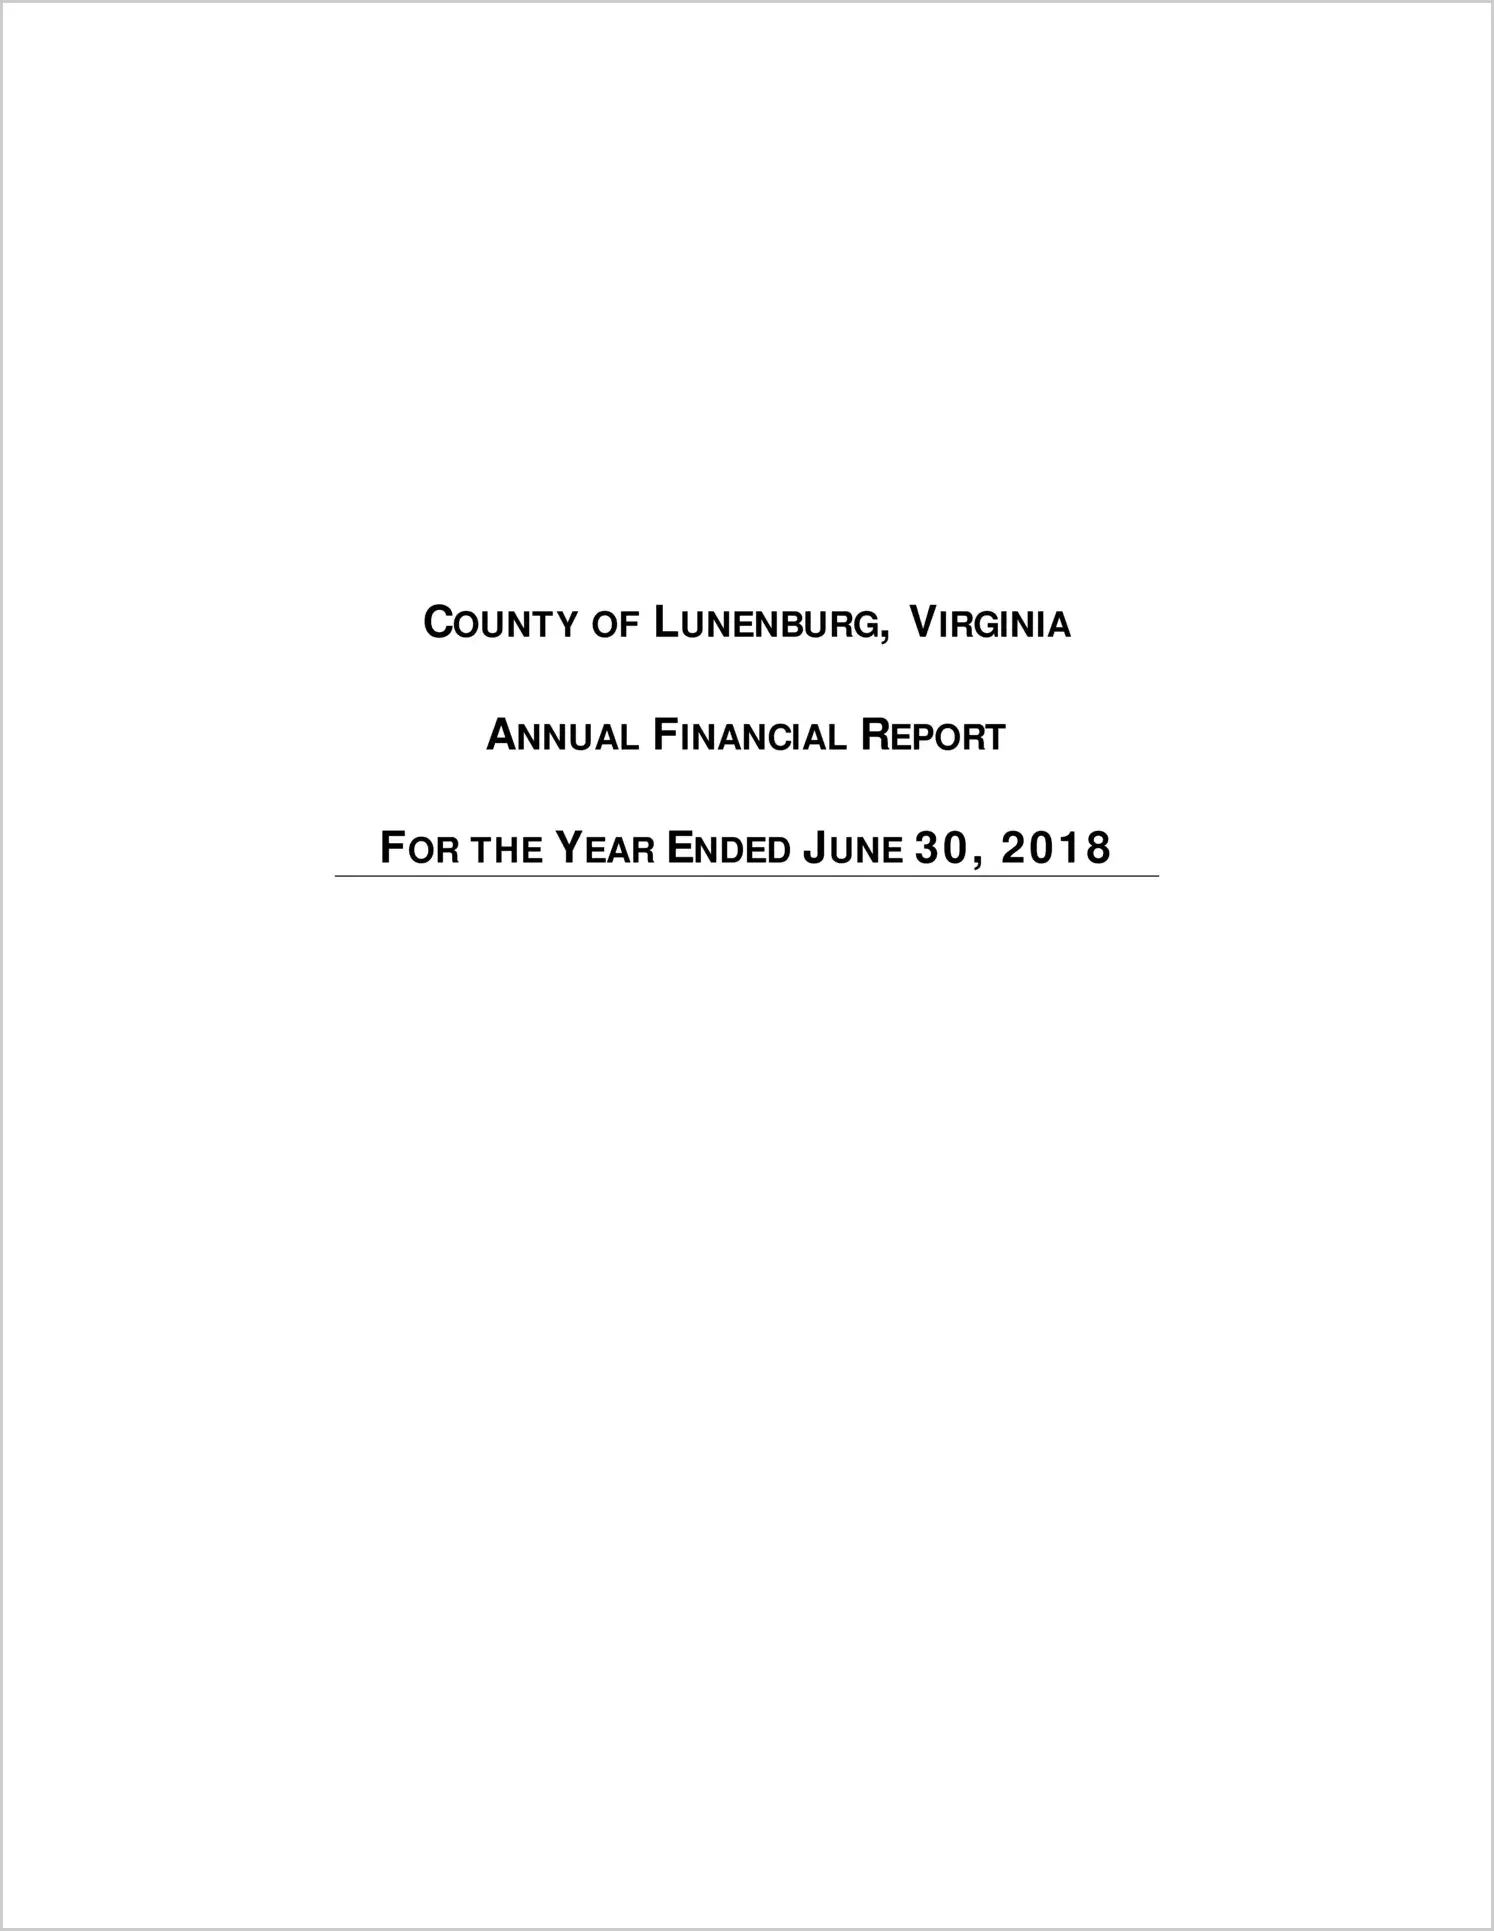 2018 Annual Financial Report for County of Lunenburg